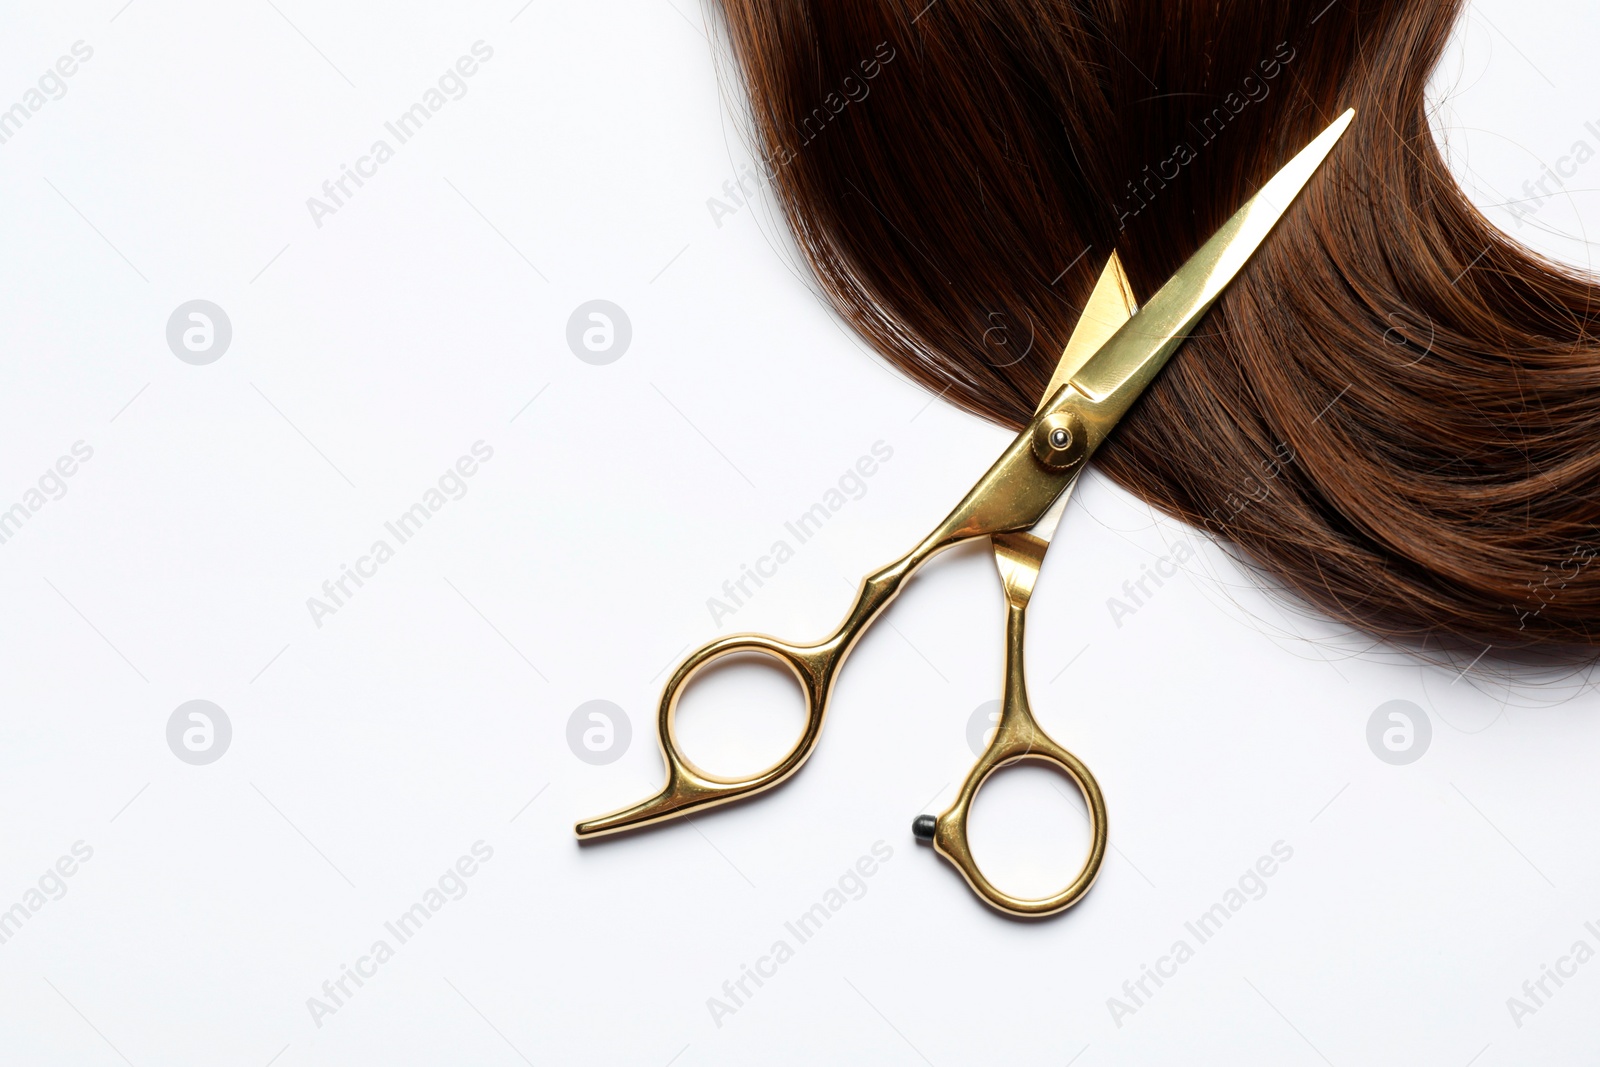 Photo of Professional hairdresser scissors with brown hair strand on white background, top view